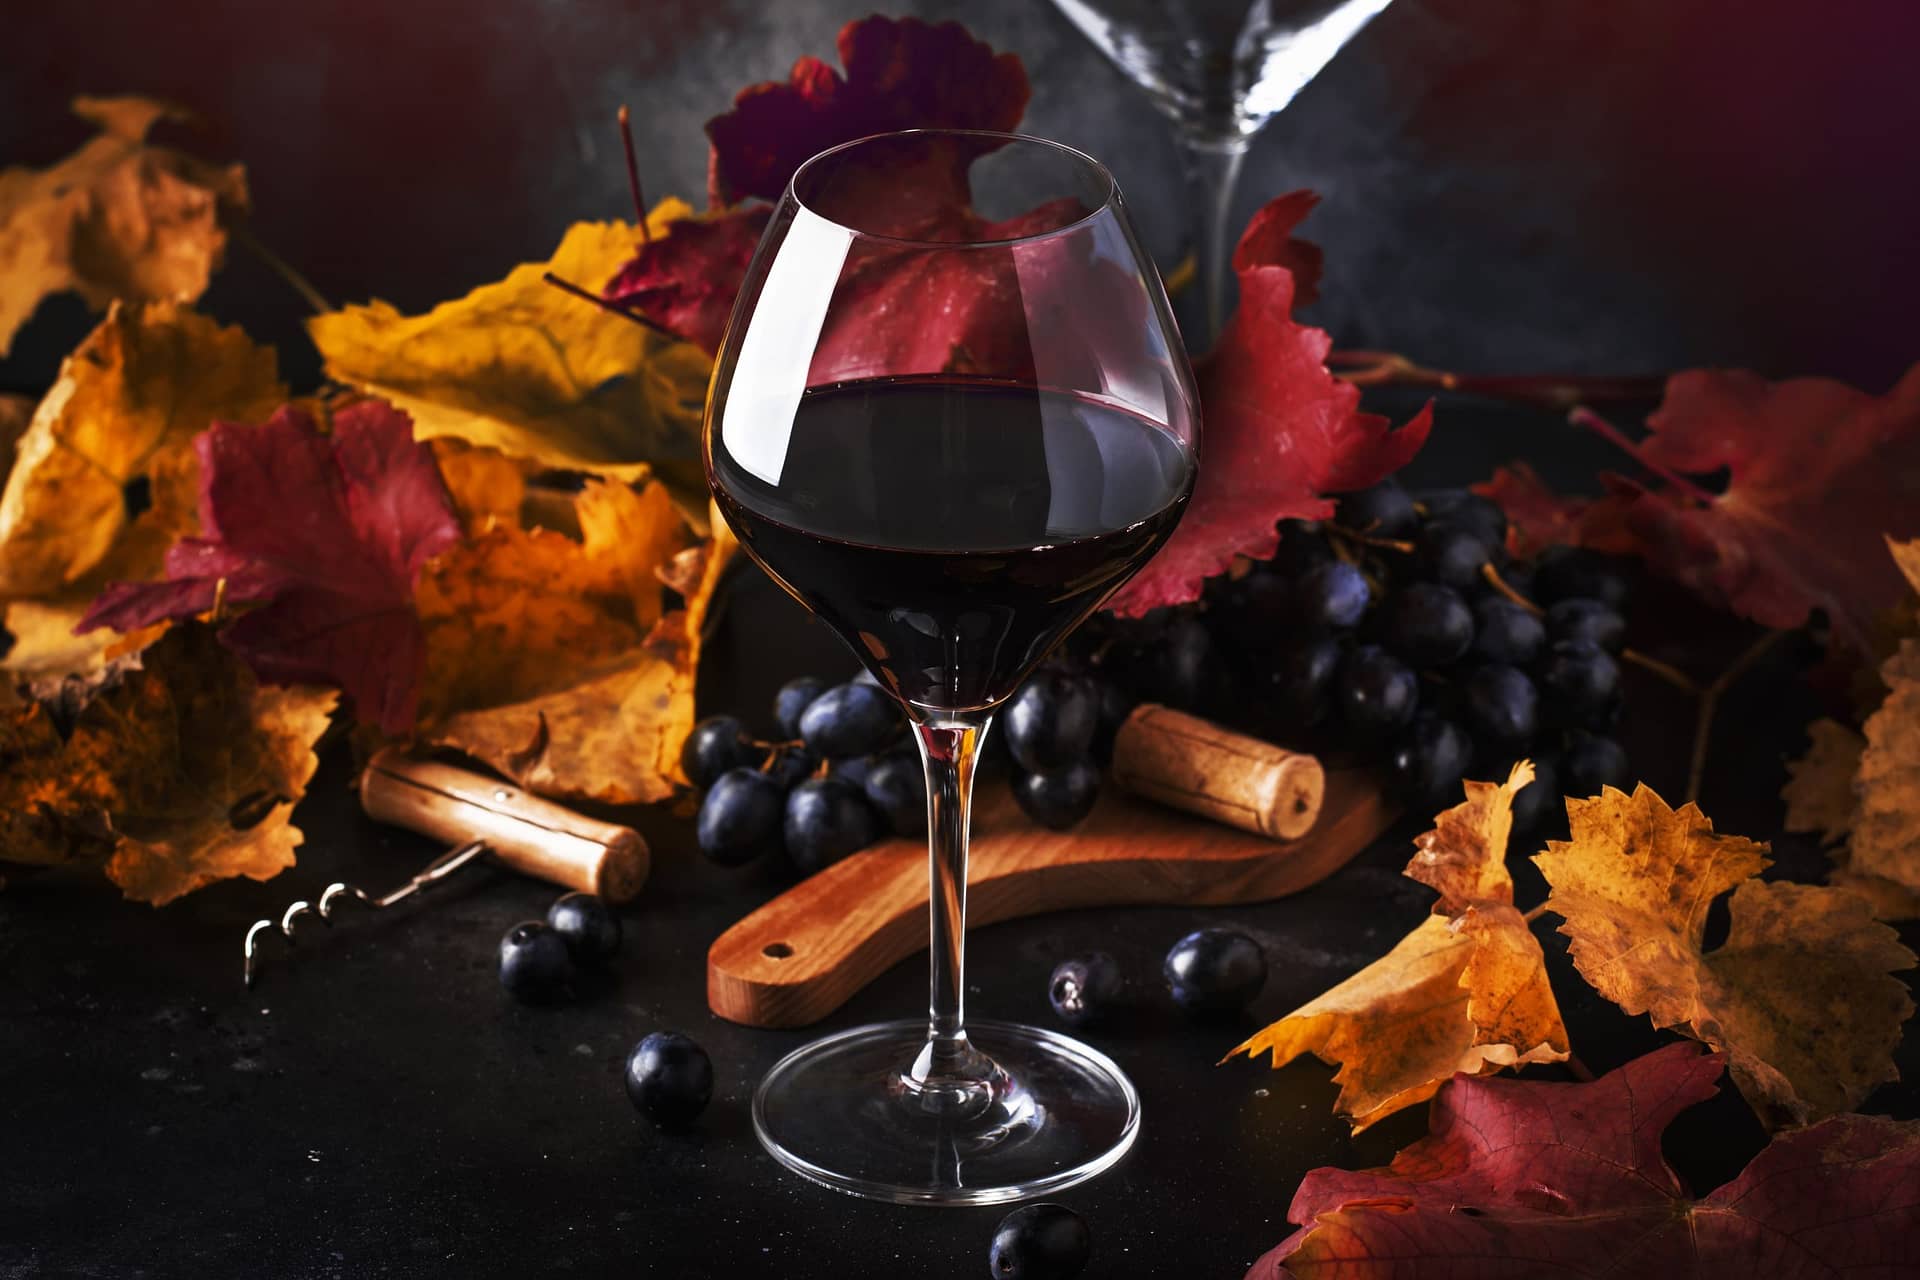 Dry Red wine in wine glass, fall still life with red and yellow